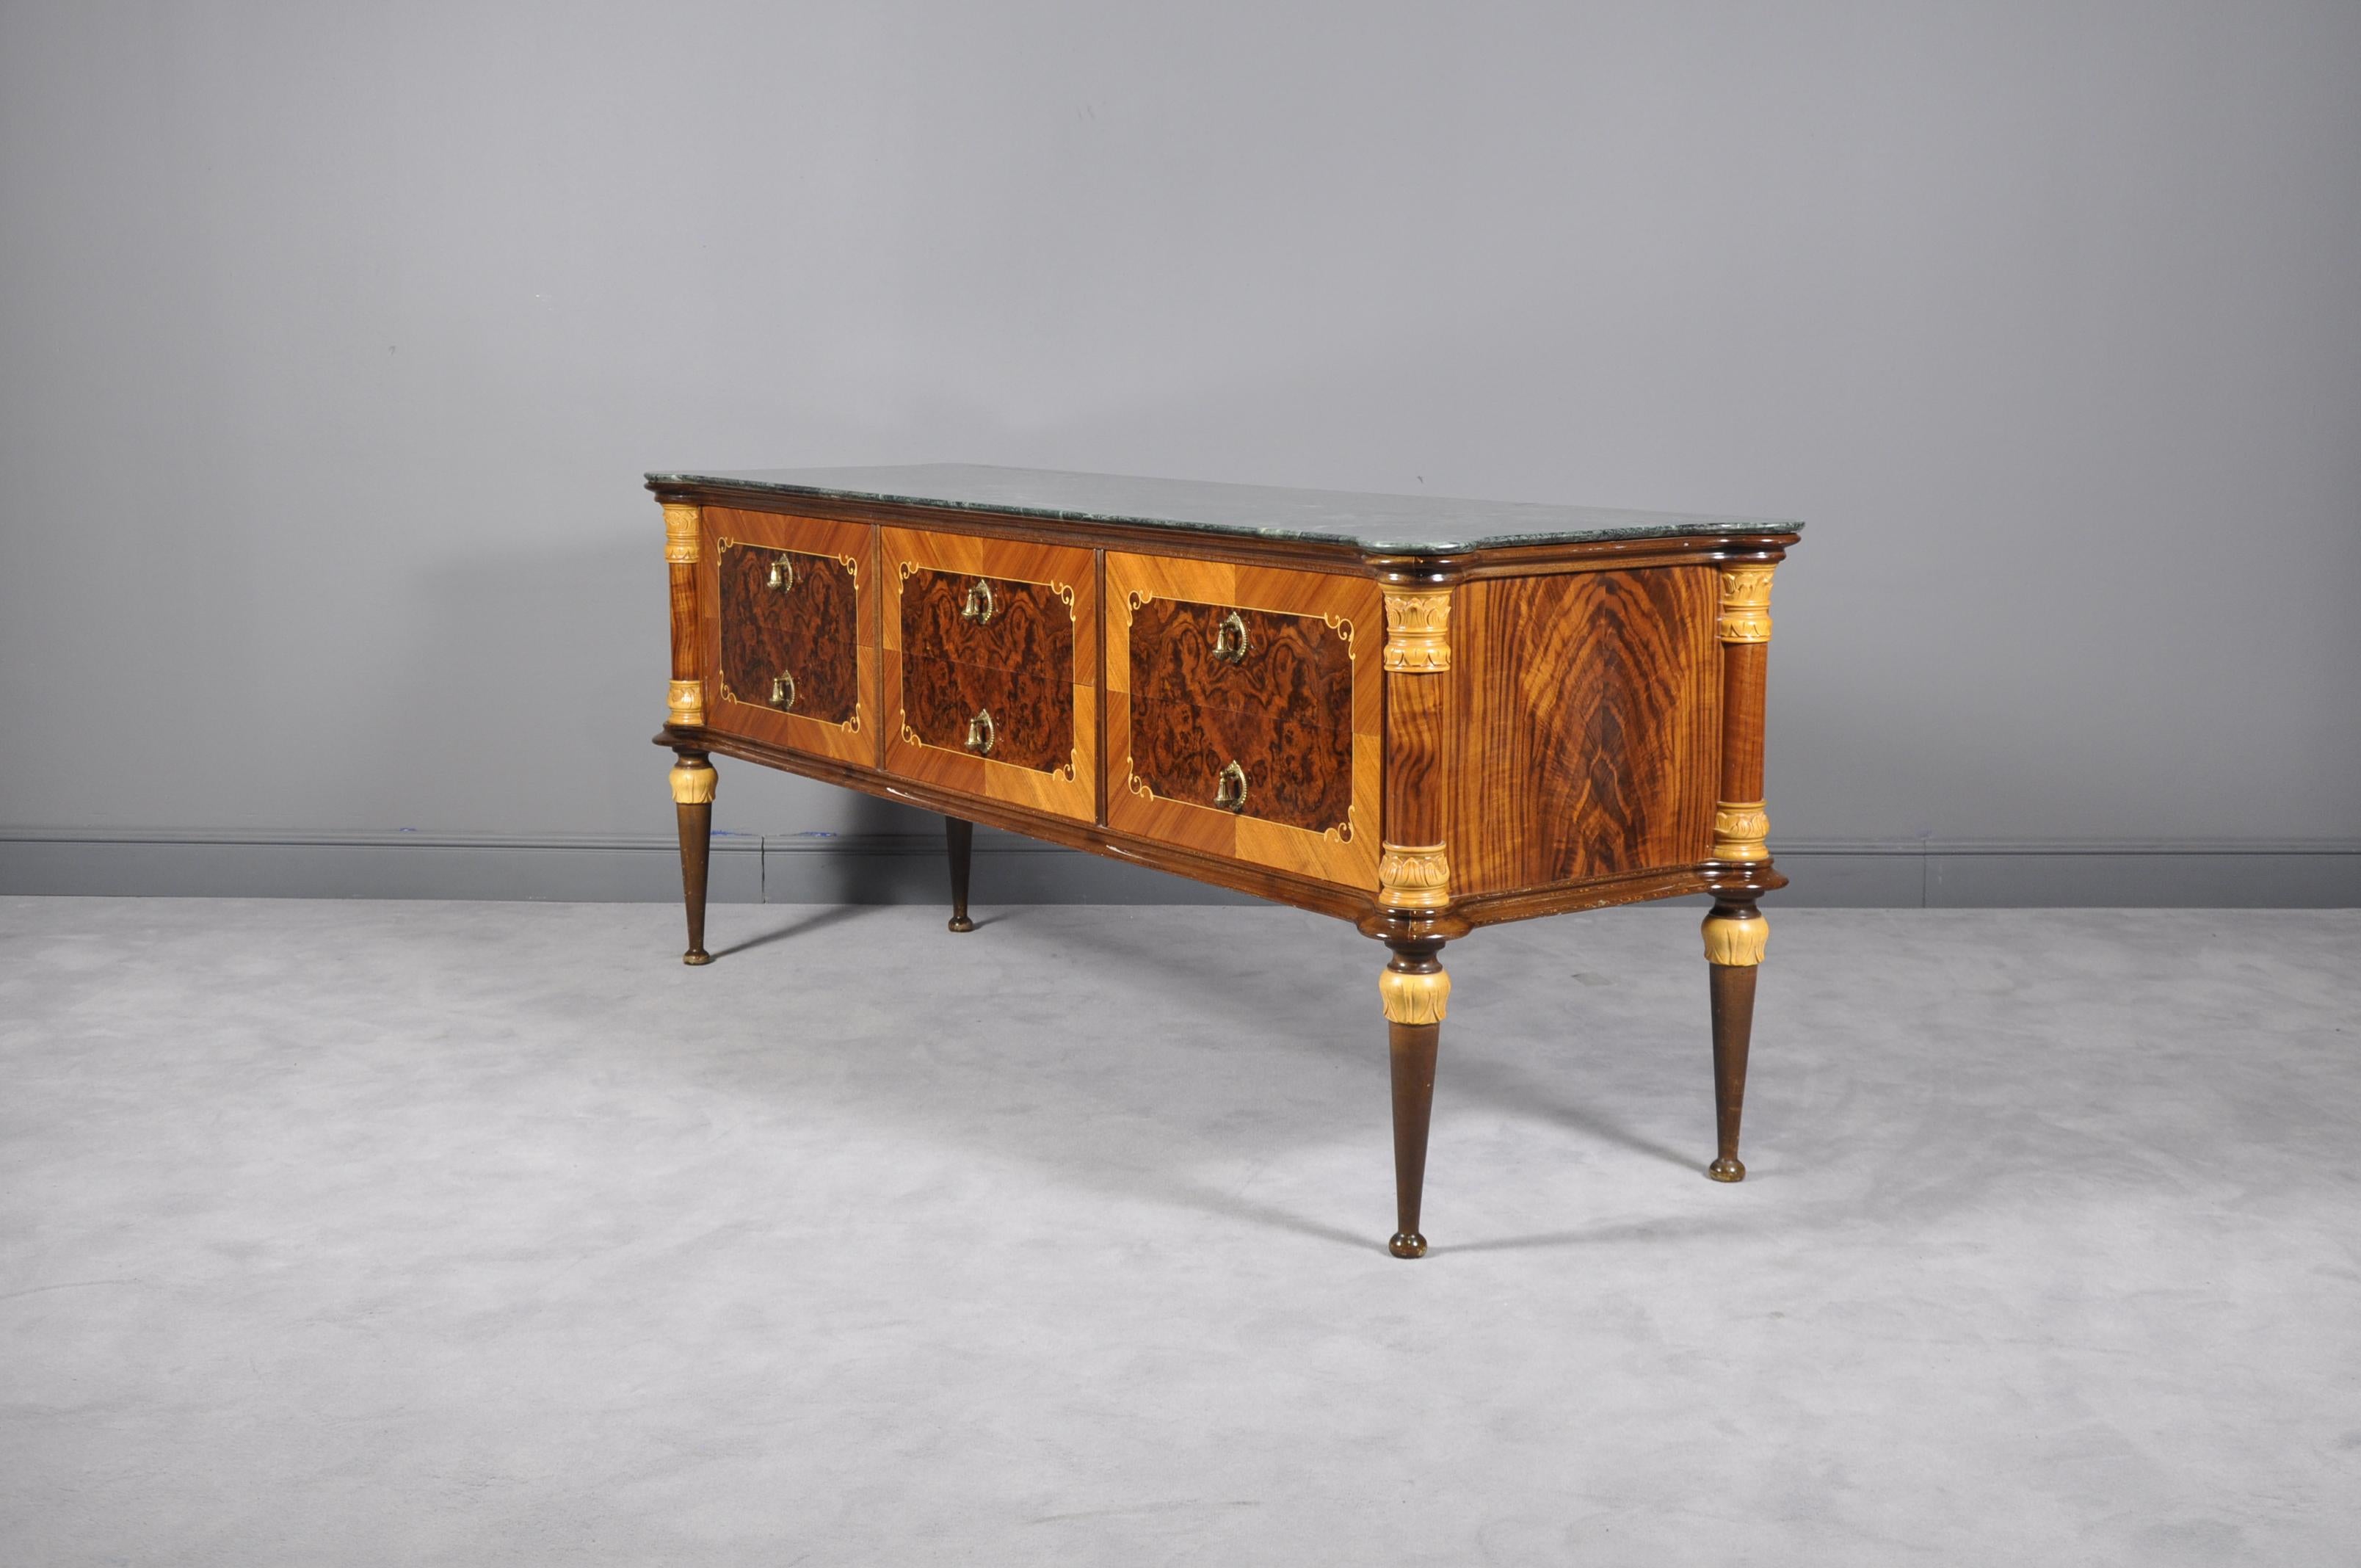 Sideboard with six drawers, carved legs in burl wood, walnut and marble top.